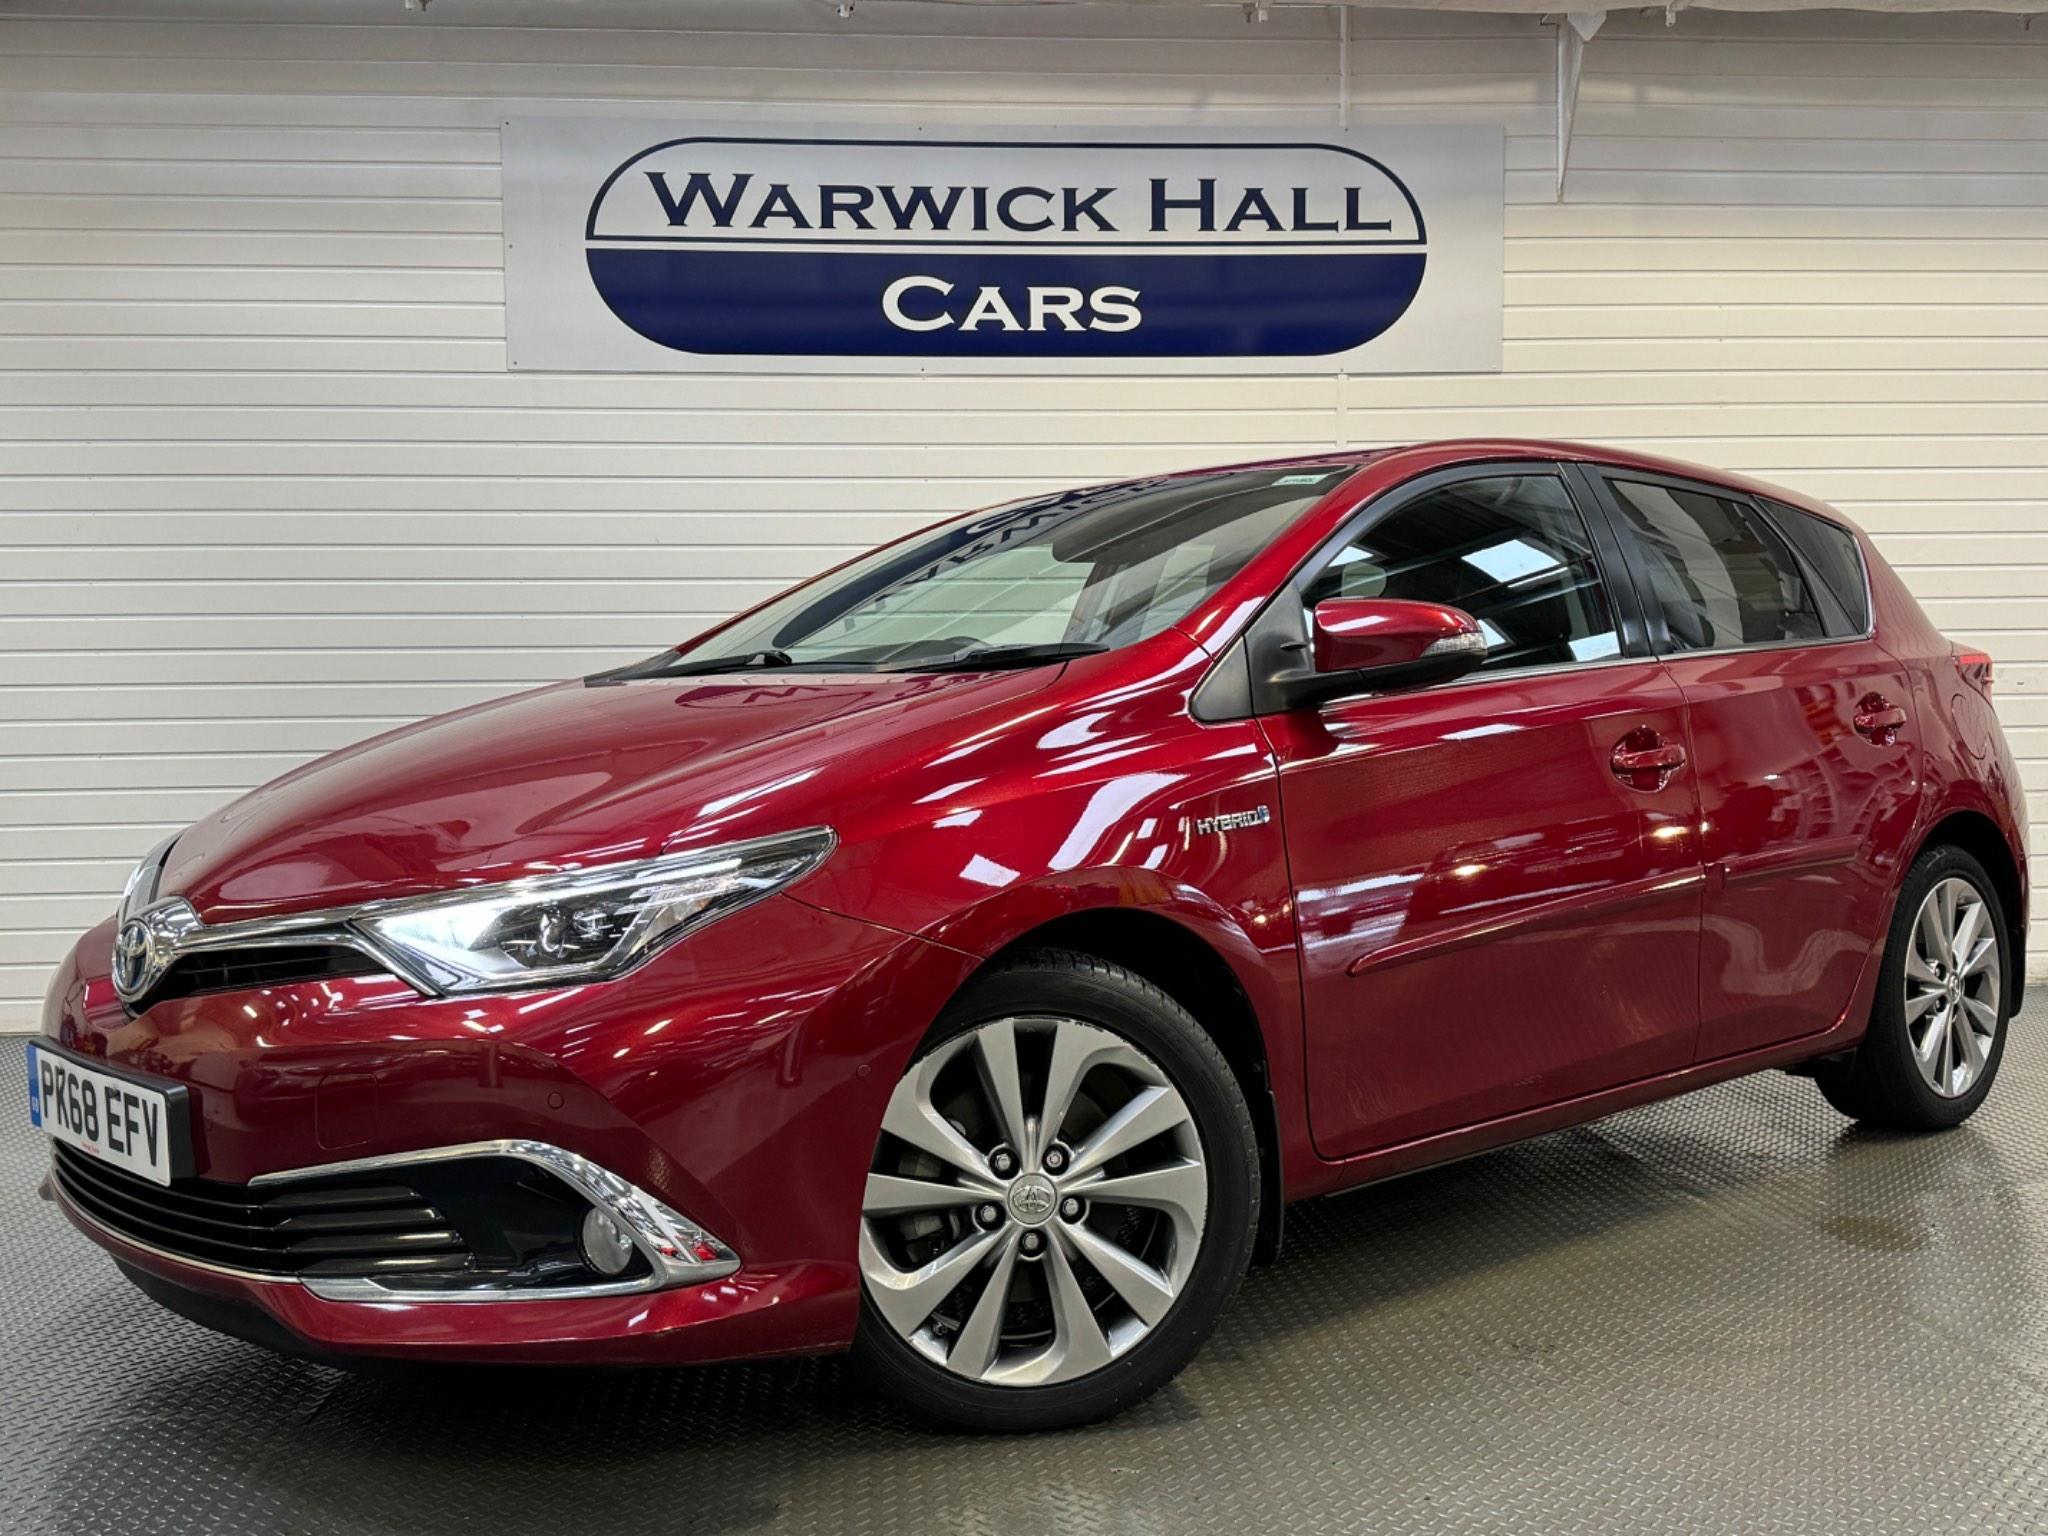 Toyota Auris 1.8 VVT-h Excel CVT Euro 6 (s/s) 5dr For Sale in Greater Manchester